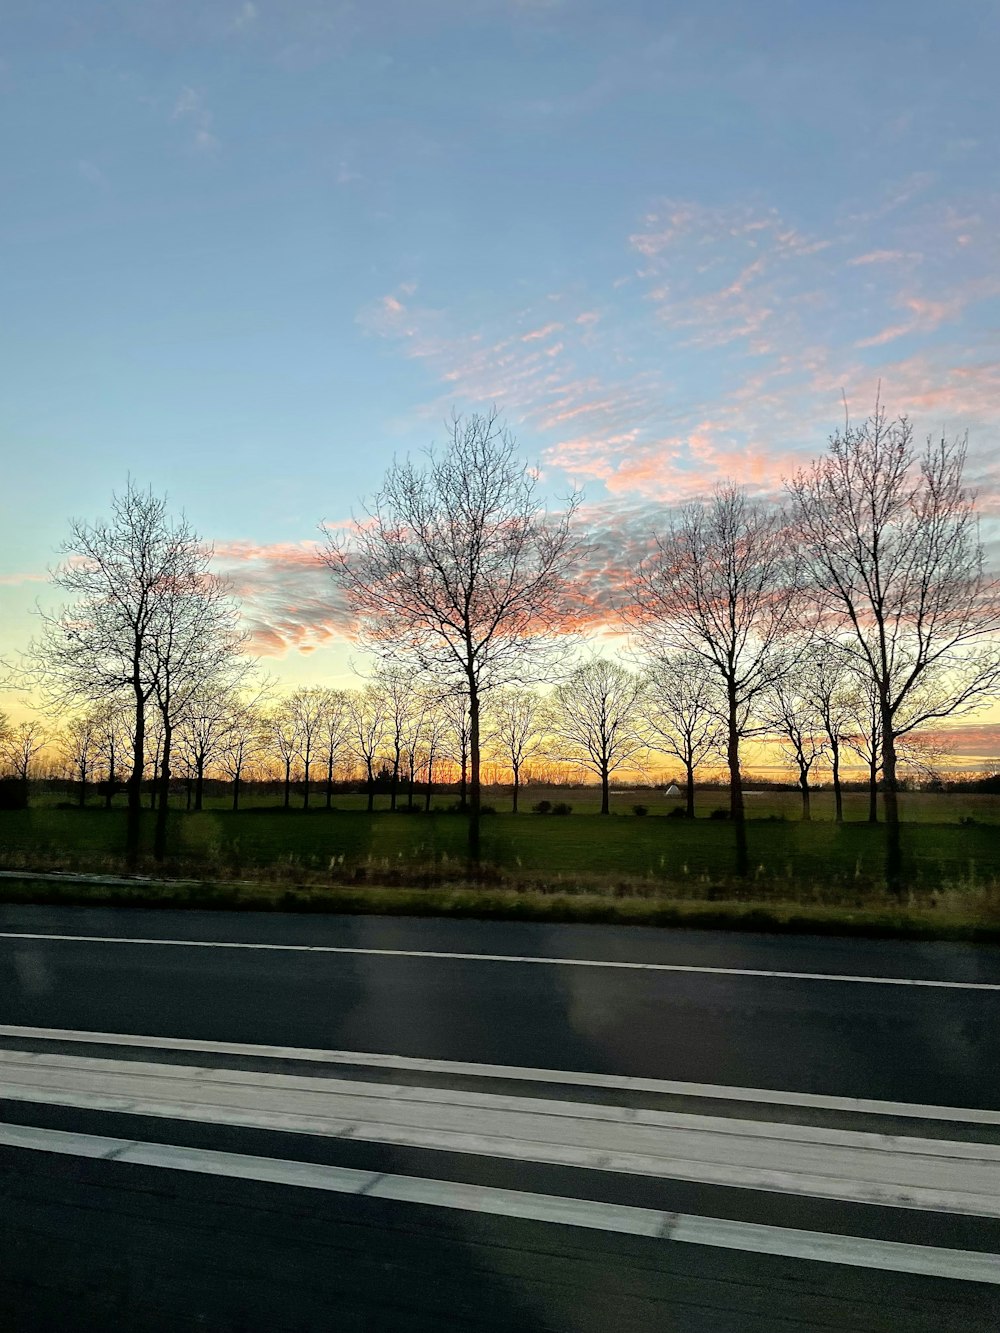 a picture of a sunset taken from a car window